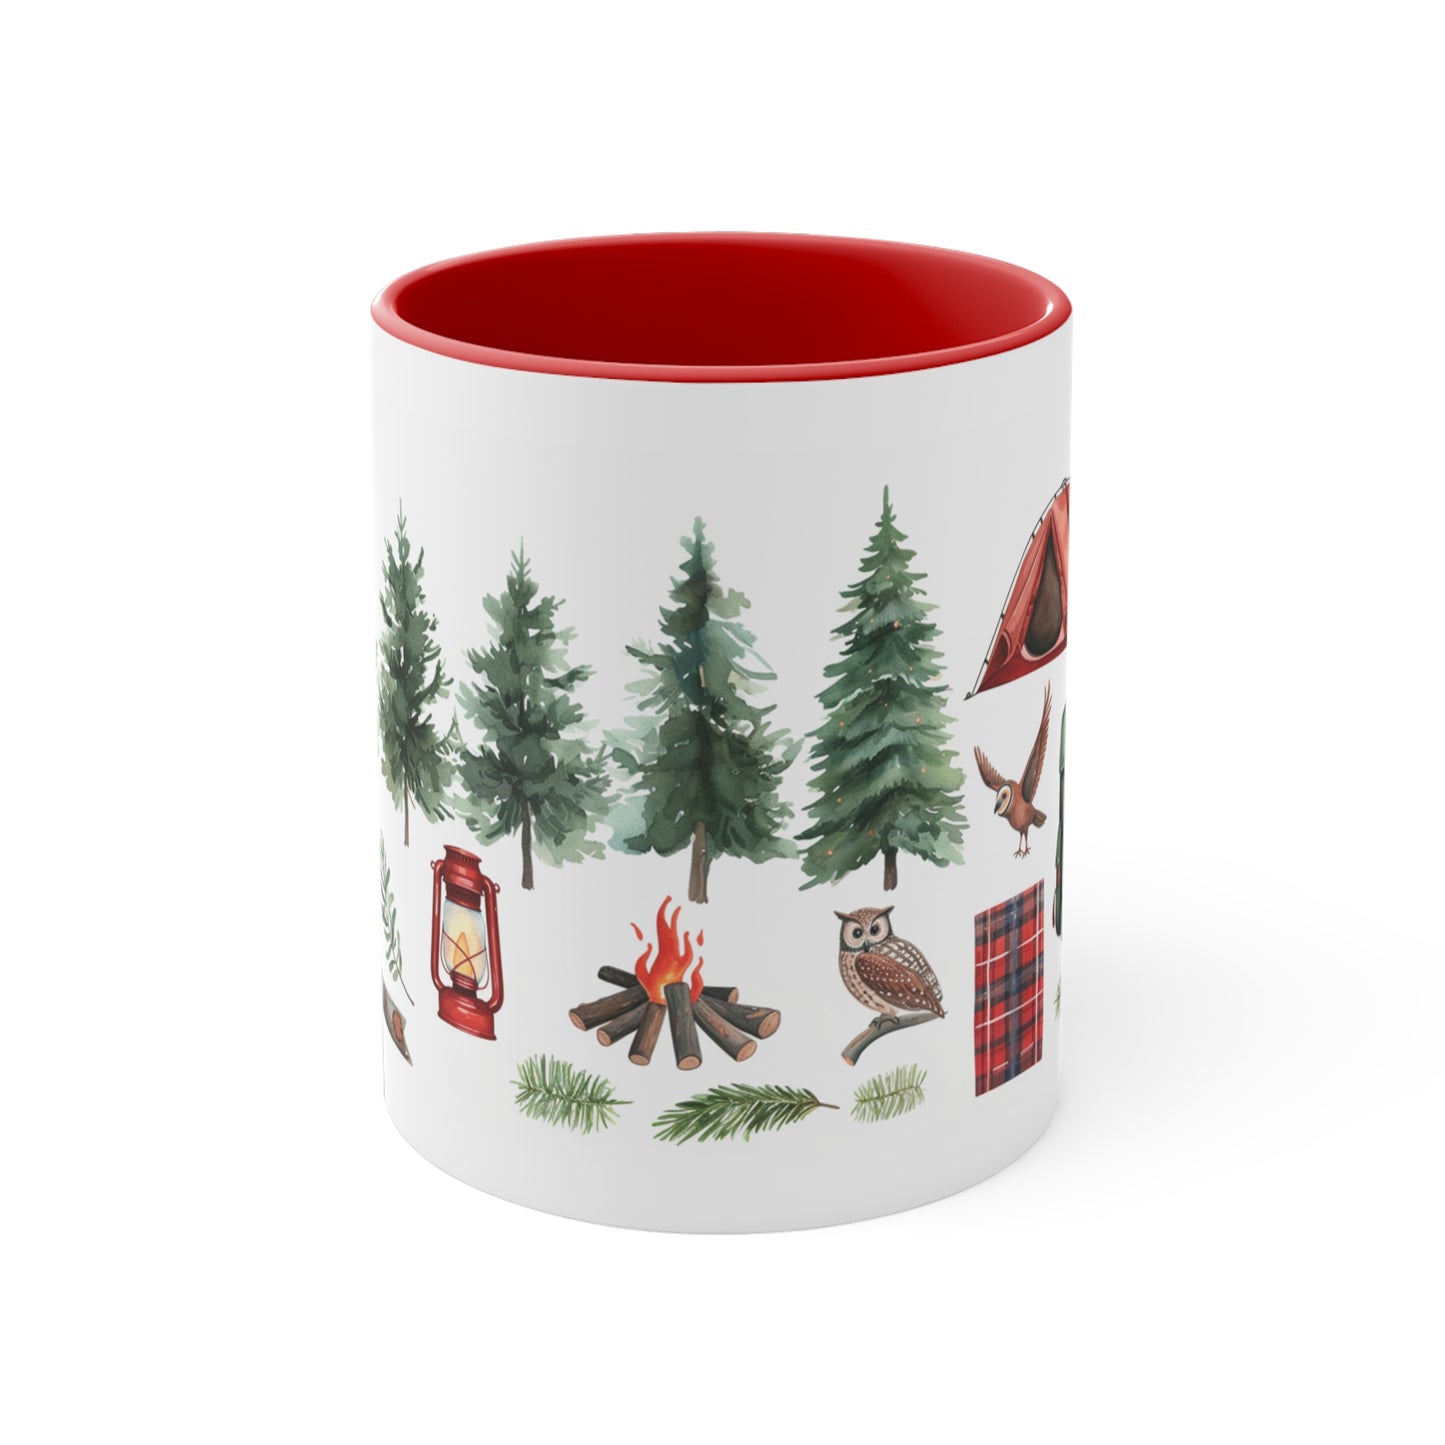 Camping Red Coffee Mug, Tent Pine Trees Camp Fire Nature Owl Watercolor Art White Ceramic Cup Tea Hot Chocolate Lover Unique Cool Gift